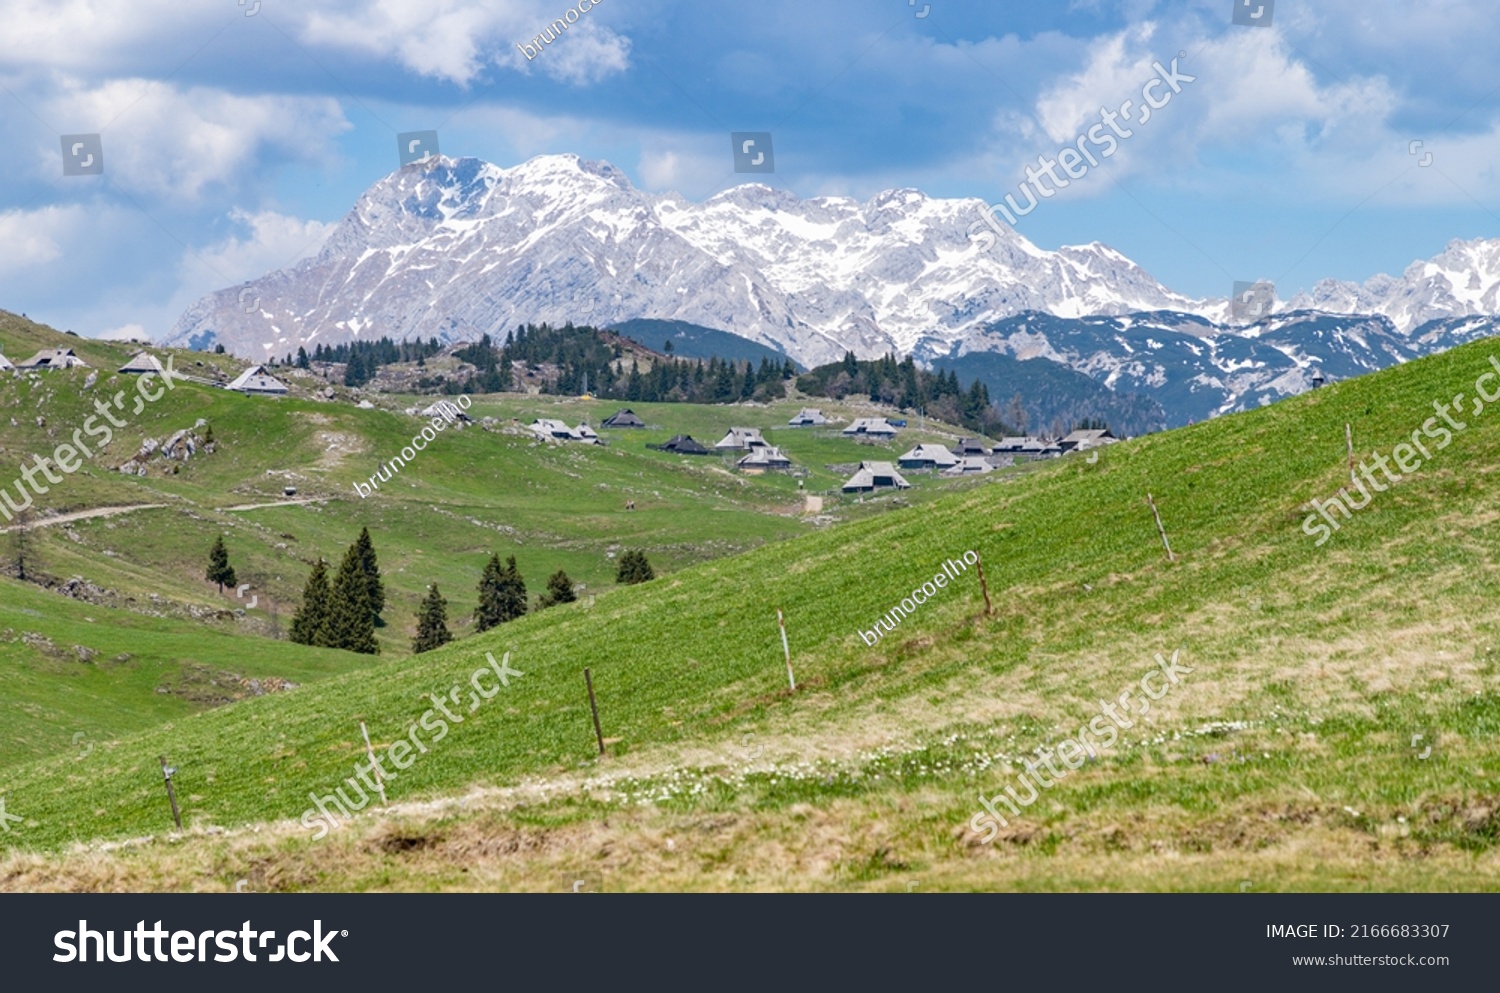 A picture of the landscape of Velika Planina, or Big Pasture Plateau, and its herder huts, with the Kamnik–Savinja Alps on the background. #2166683307